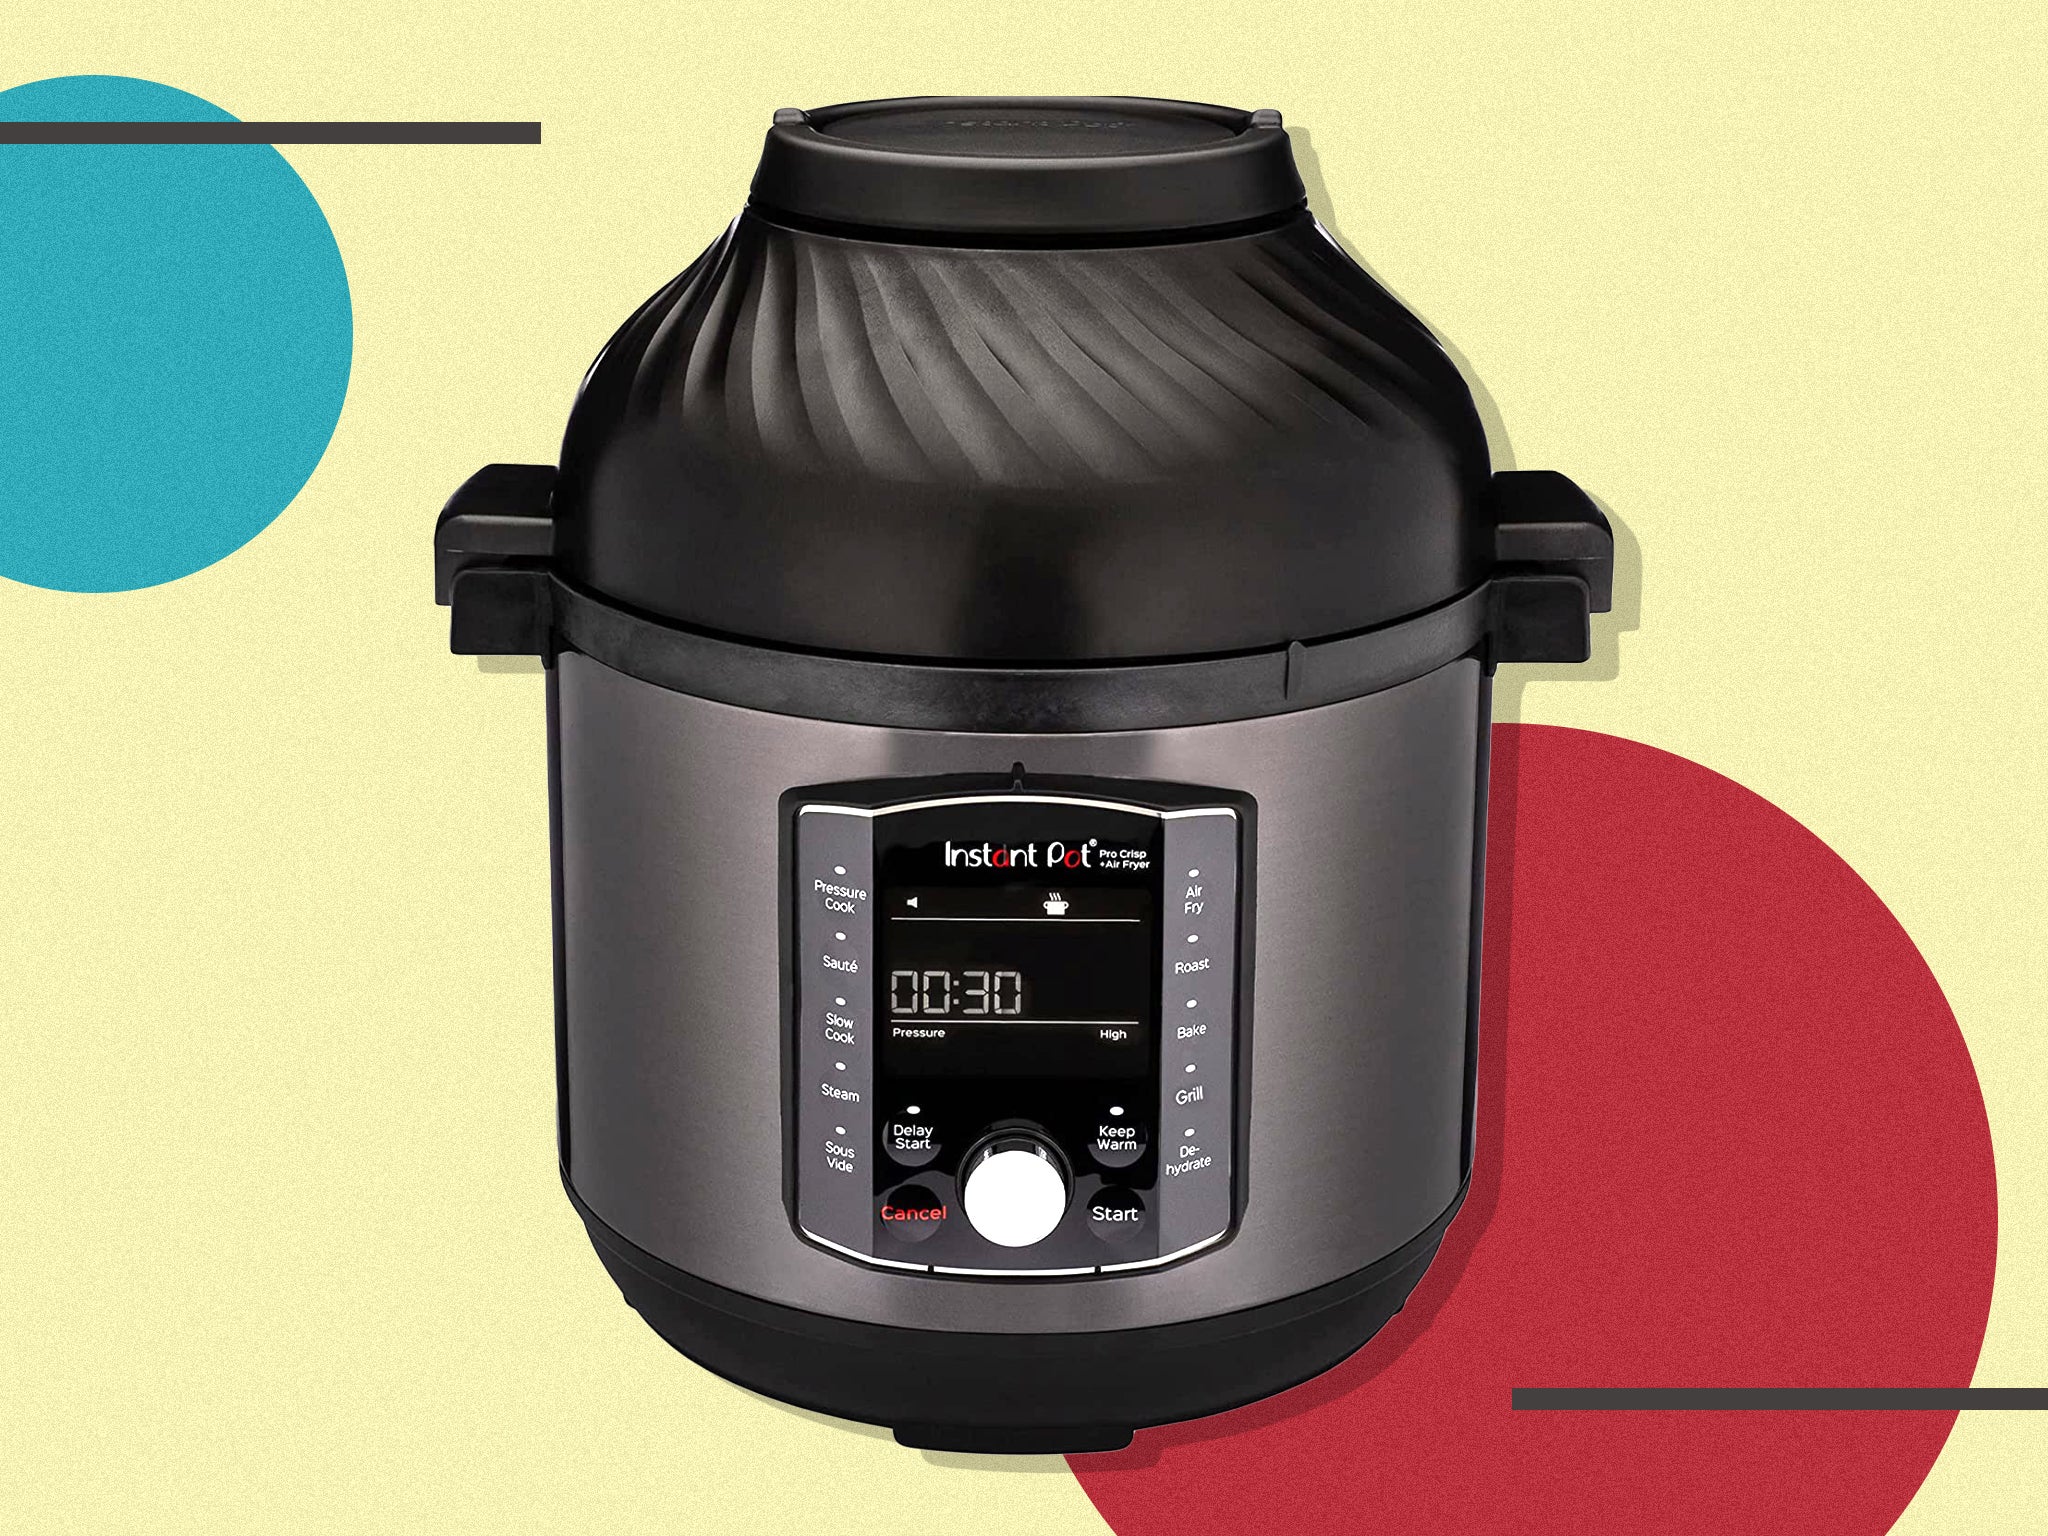 Combining 11 kitchen appliances in one, it can act as an air fryer, slow cooker, steamer, dehydrator and so much more